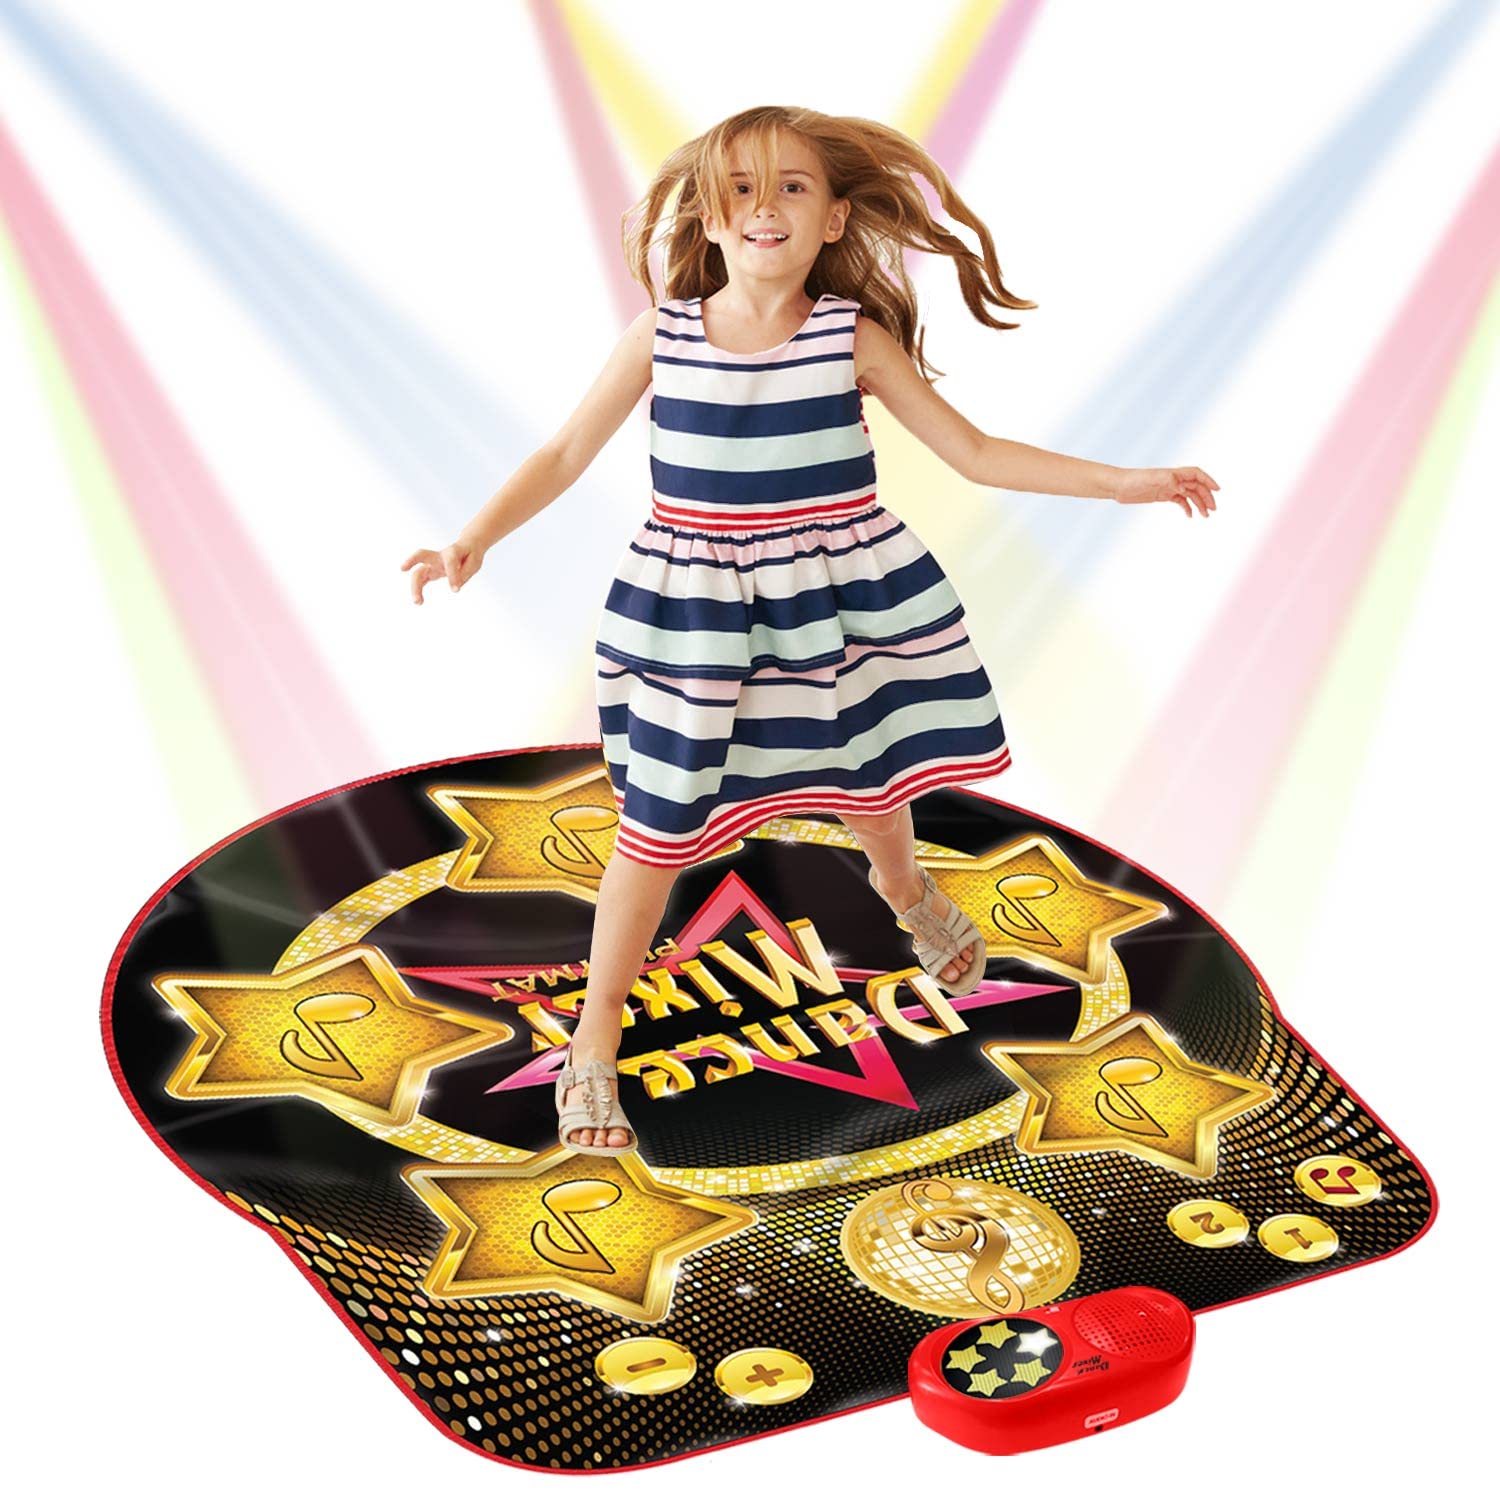 SUNLIN Dance Mat for Kids - Toys for Girls Boys Ages 3-12 Years Old - Electronic Light Up Dance Game Pad with Built-in & AUX Music - Gifts for 3 4 5 6 7 8 Year (35.8